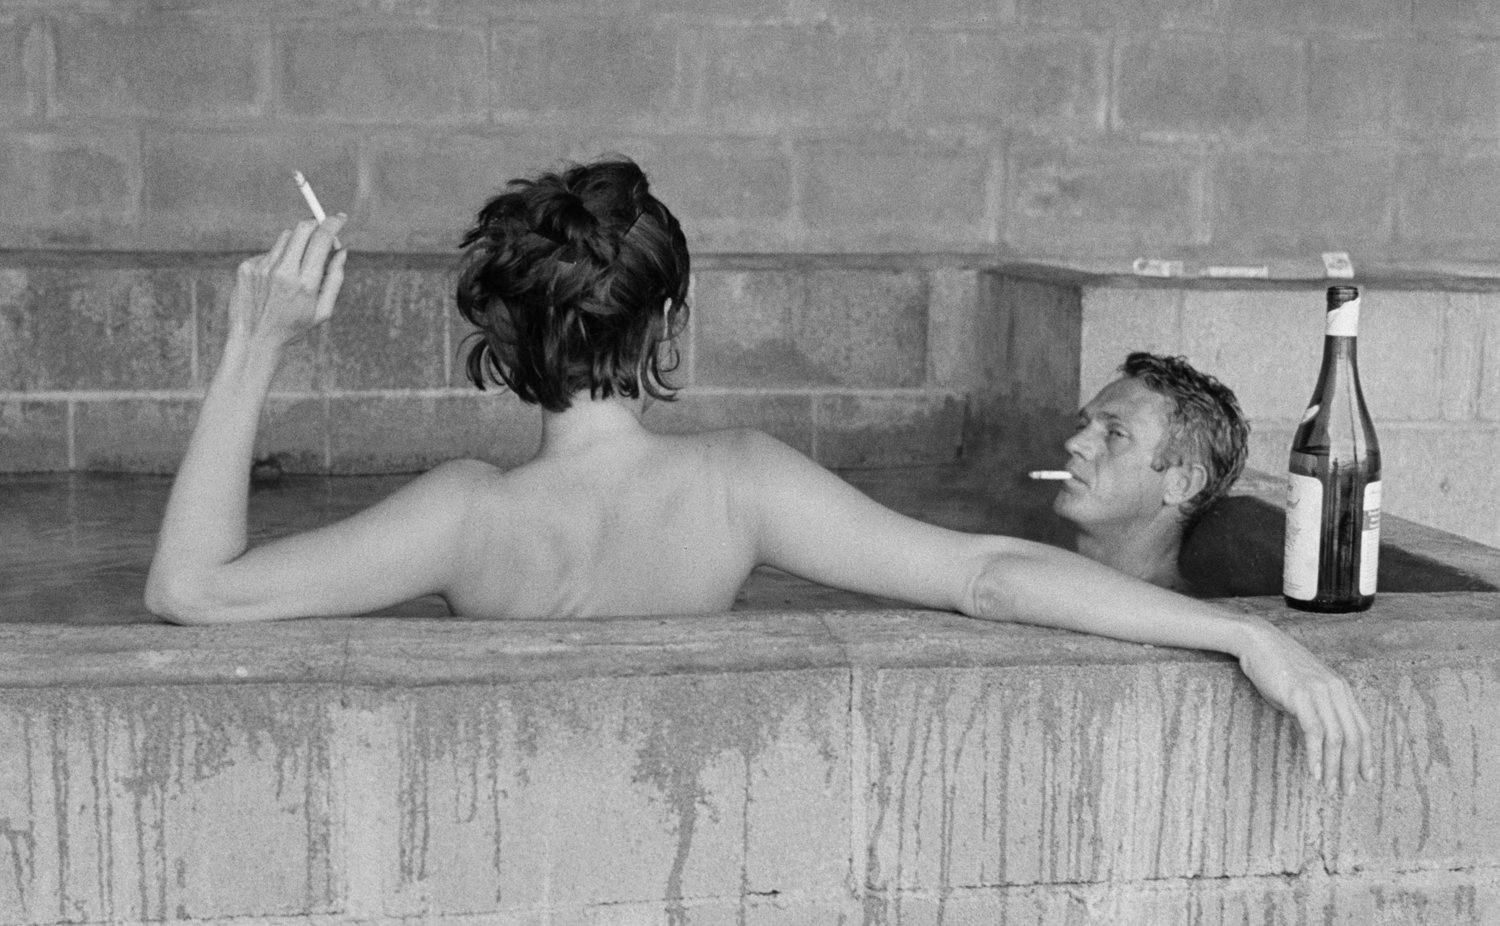 Steve McQueen and his wife, Neile, take a sulphur bath at Big Sur, 1963.